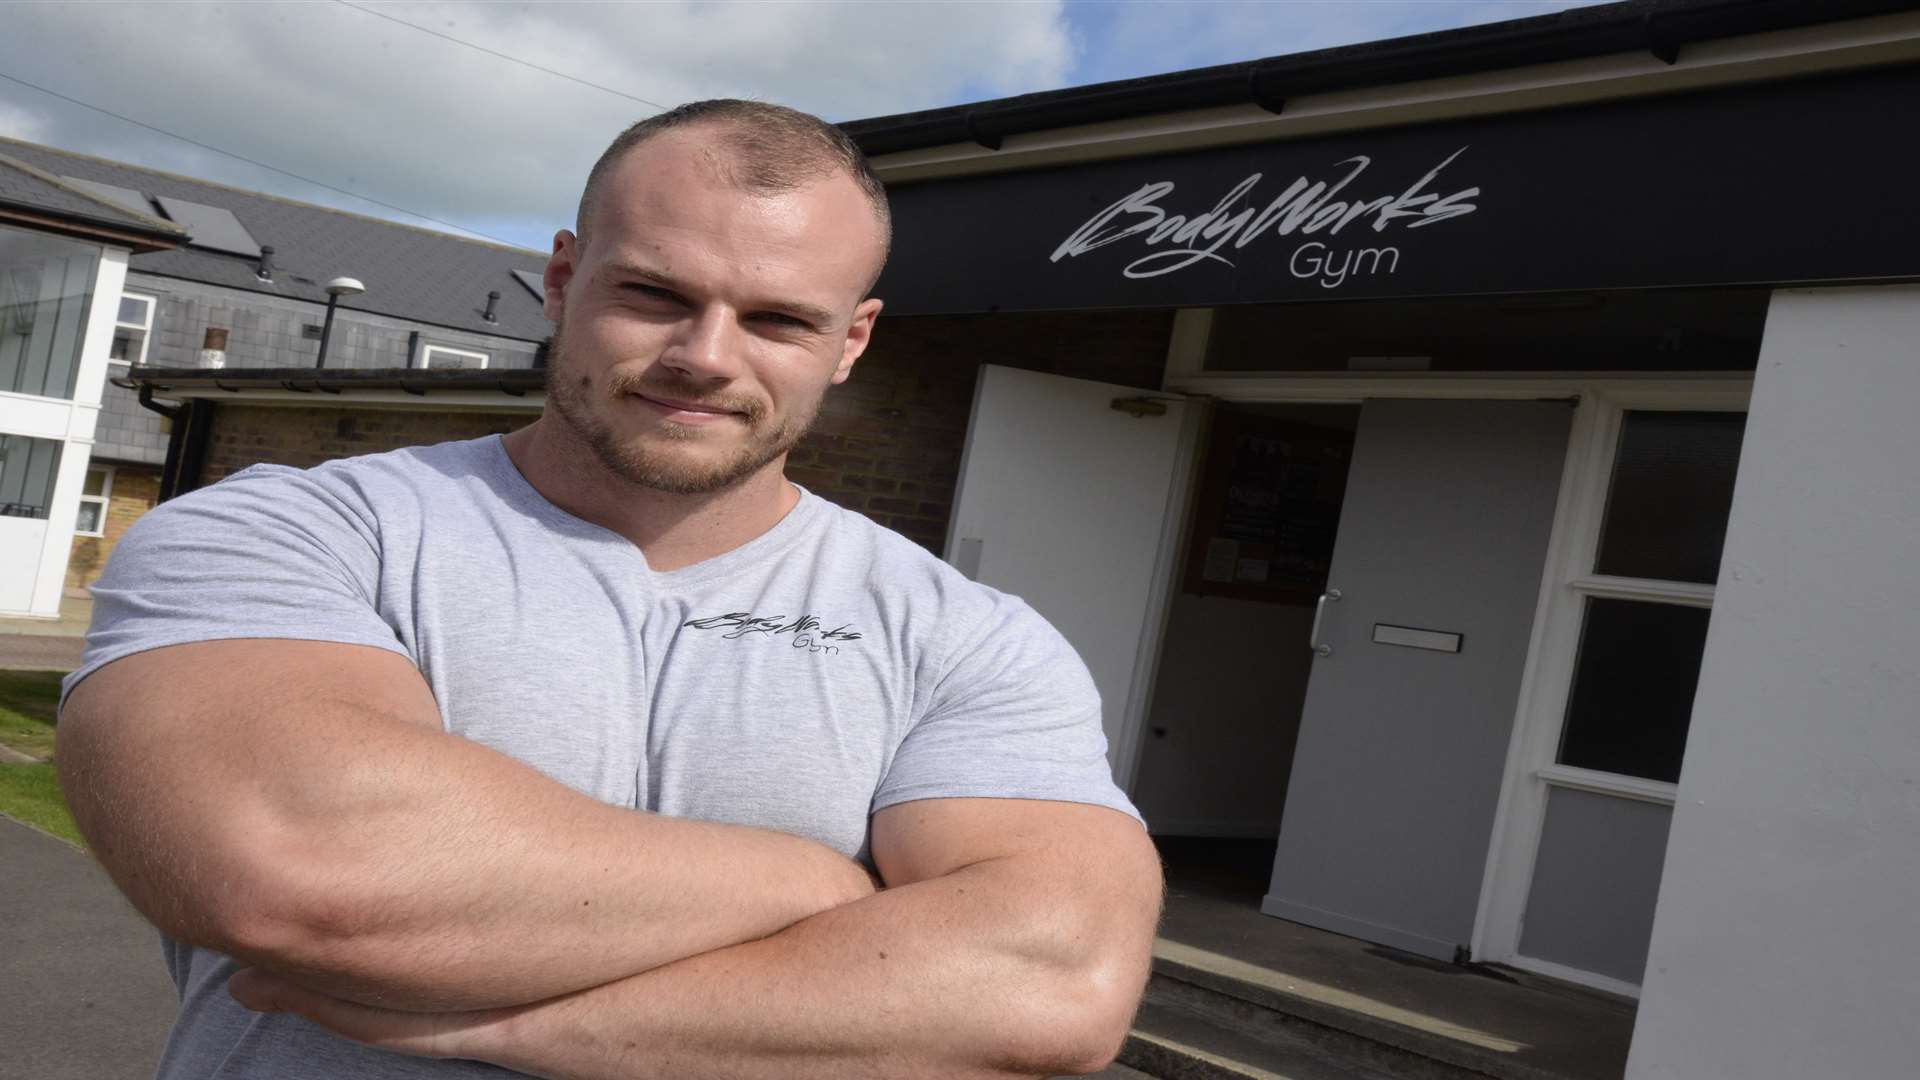 Callum Vine has given the property a lick of paint, new sign and extending its opening hours